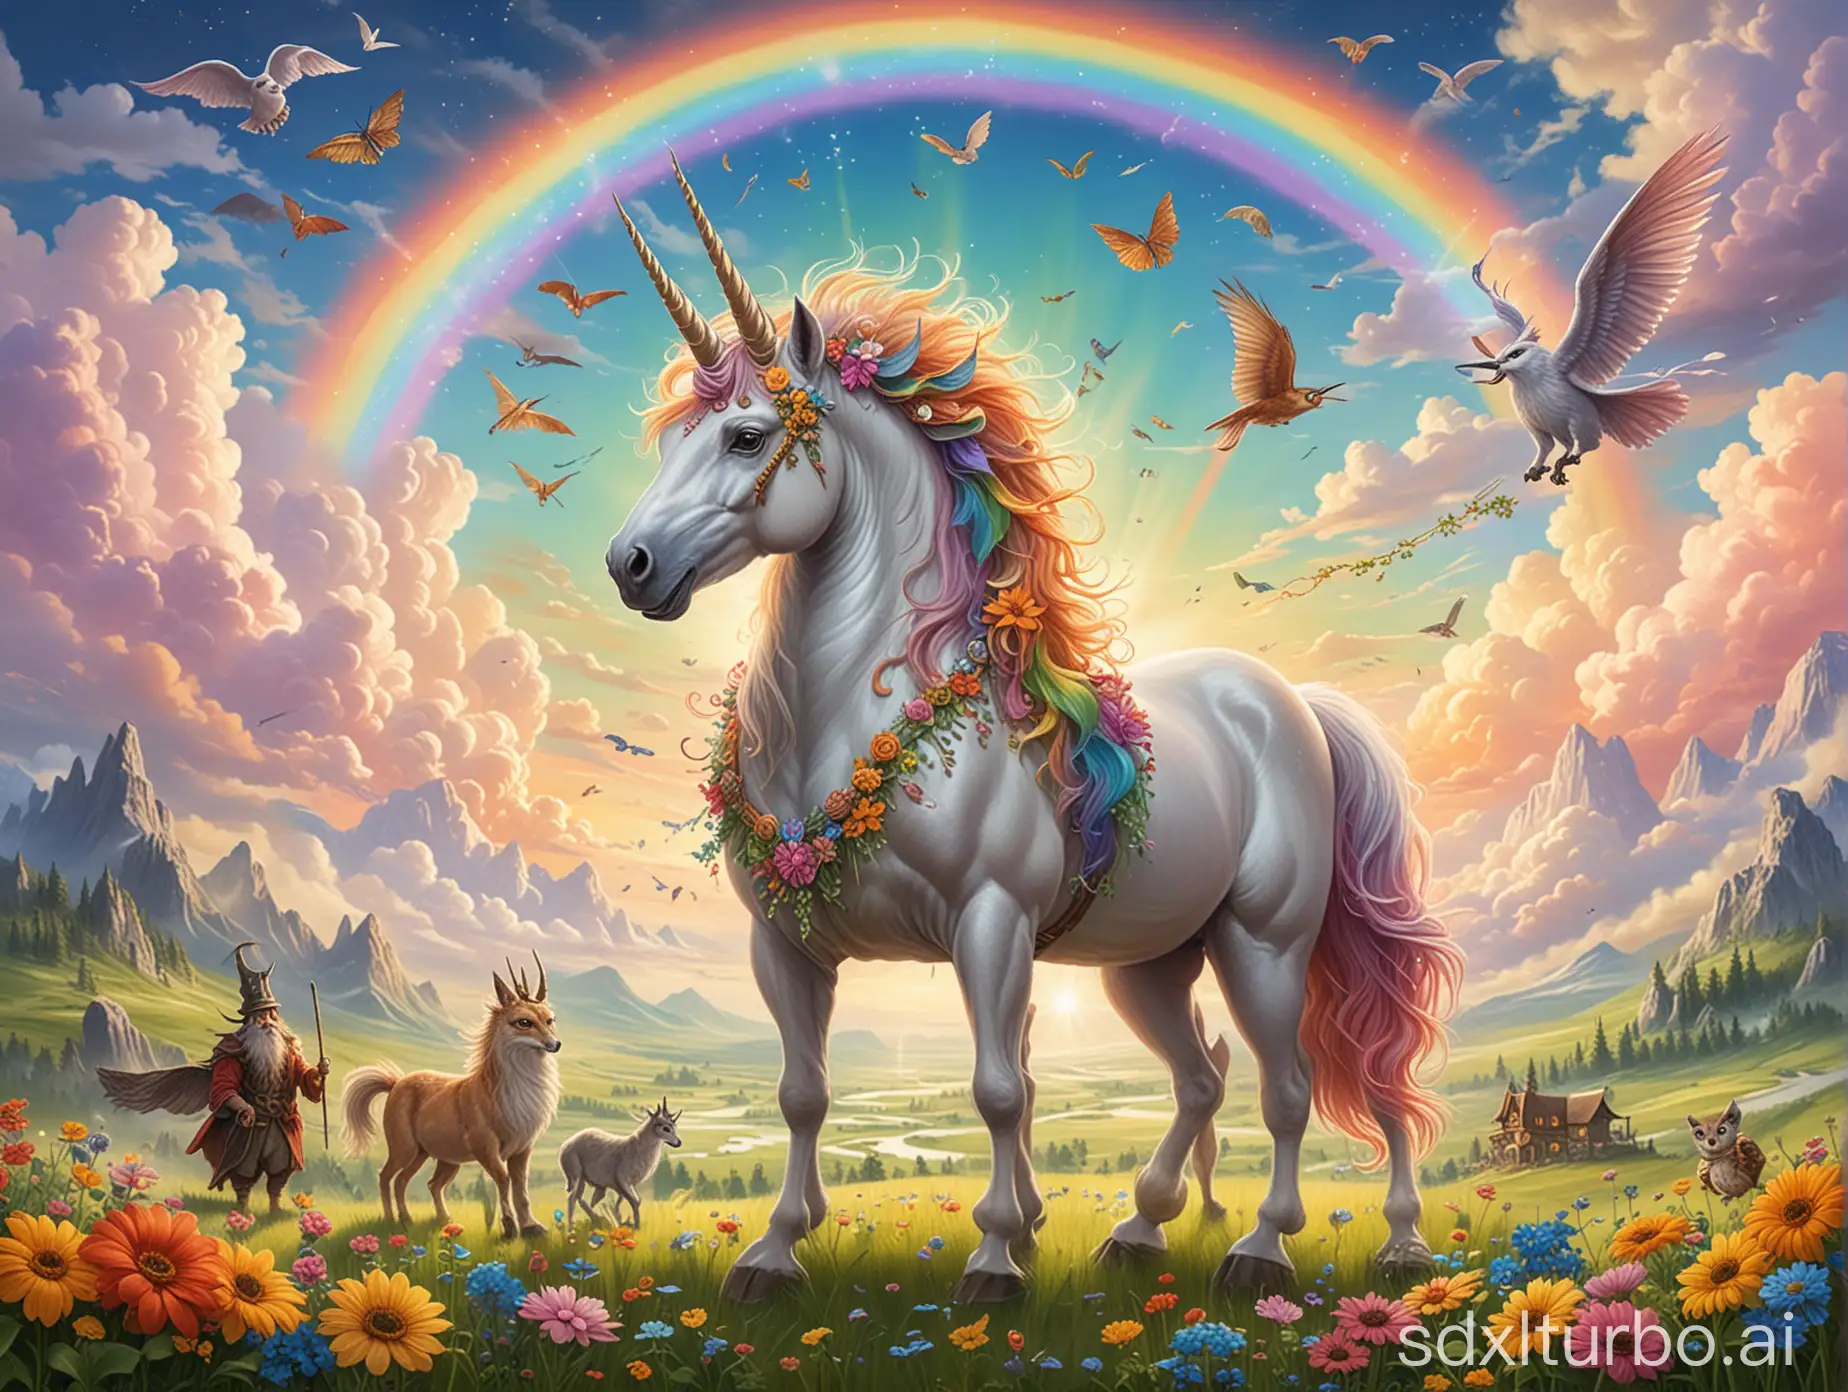 Whimsical-Gathering-of-Mythical-Creatures-in-a-Pastel-Meadow